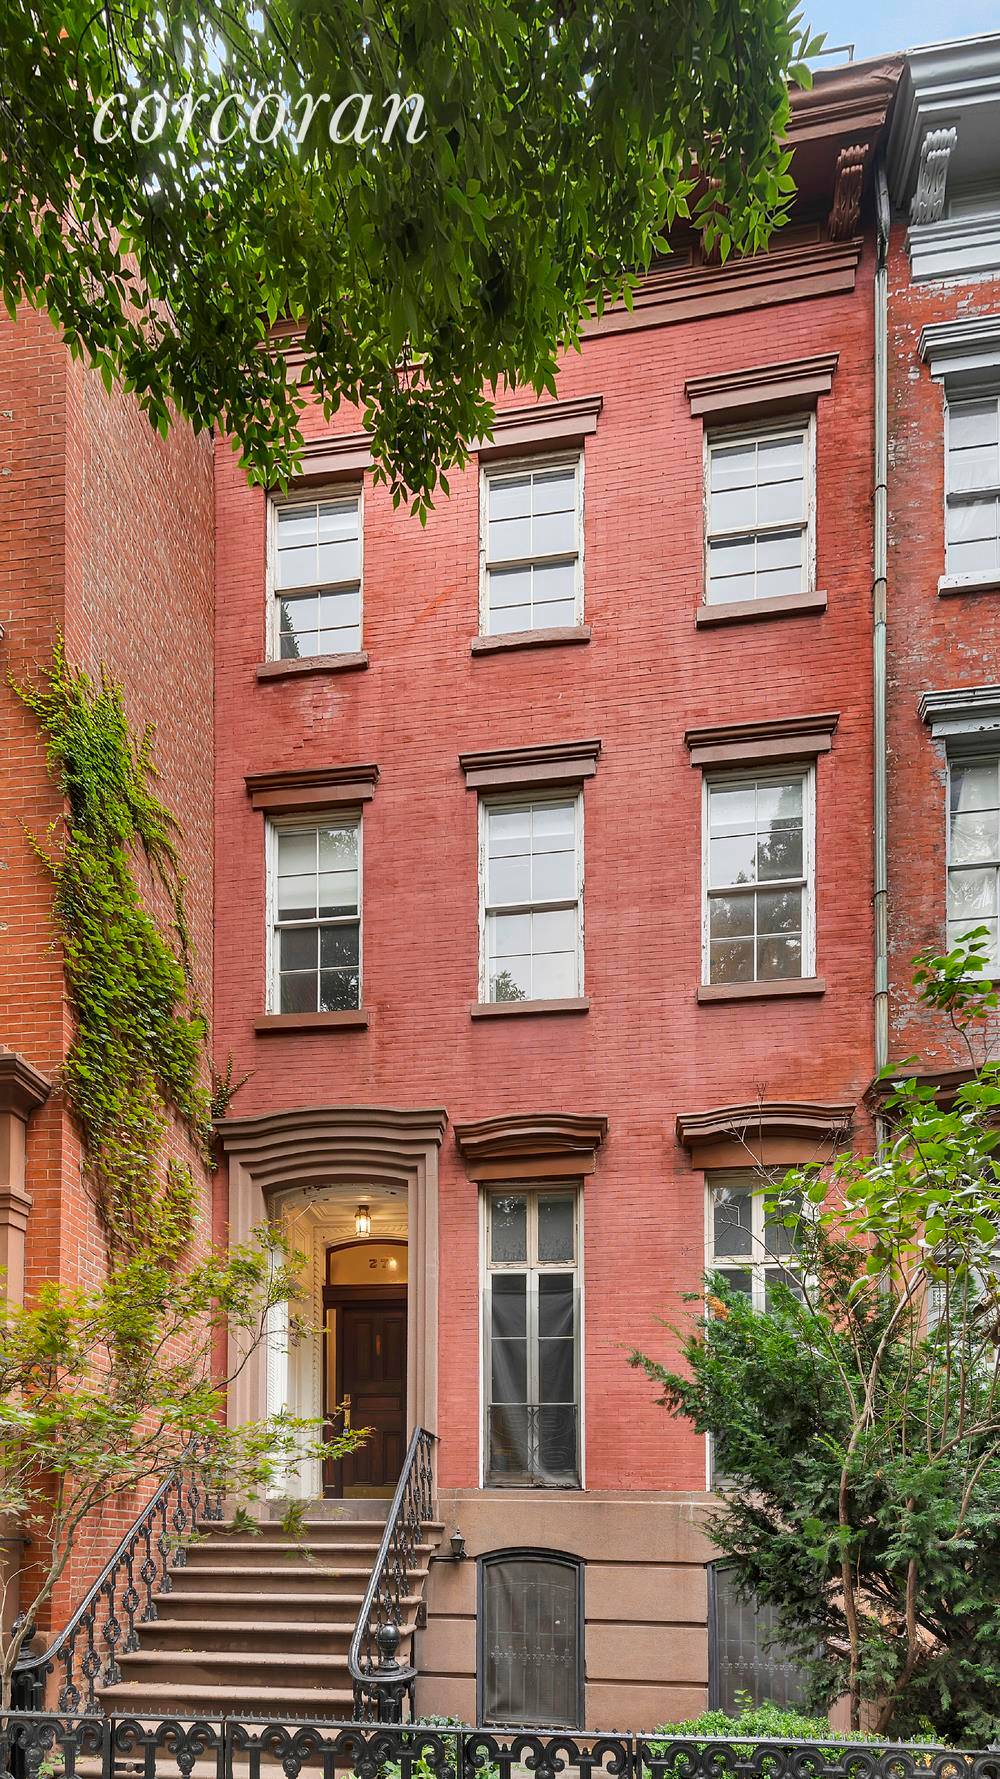 This West Village beauty is available as a single family home for the first time in decades.